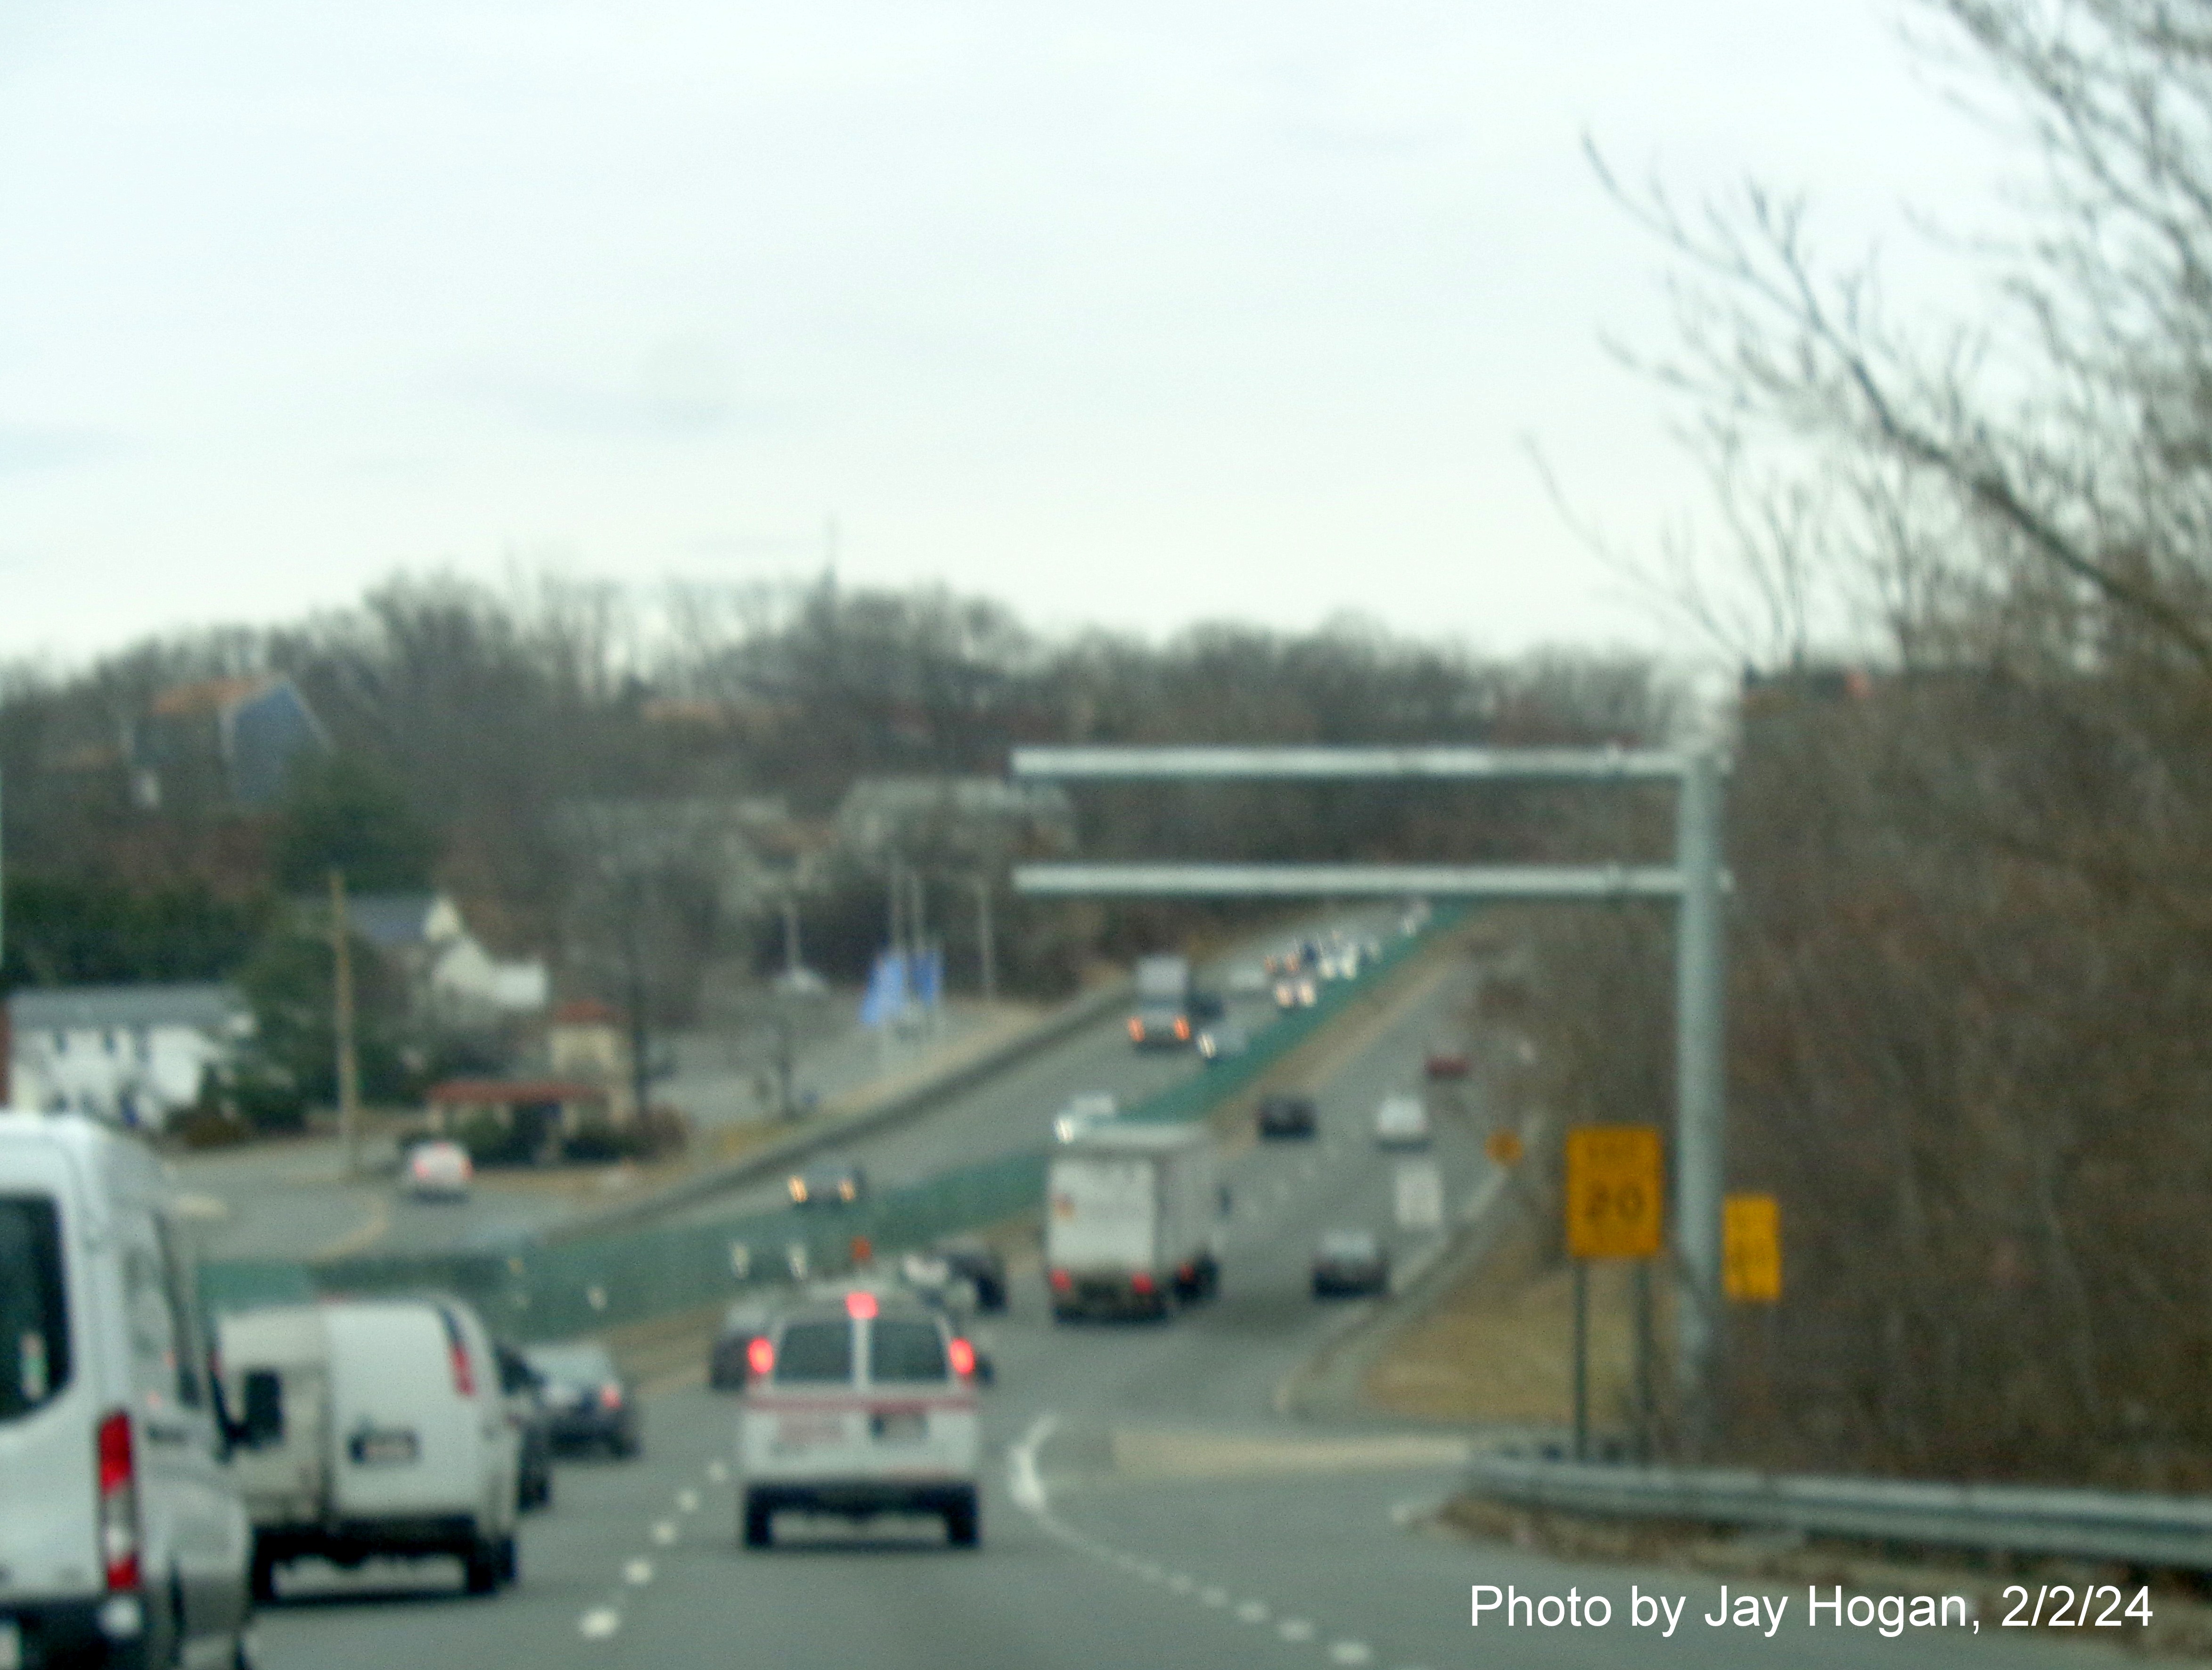 Image of cantilever post awaiting overhead ramp sign for second Lynn Street exit on US 1 North in Malden, by Kevin Manfra, February 2024